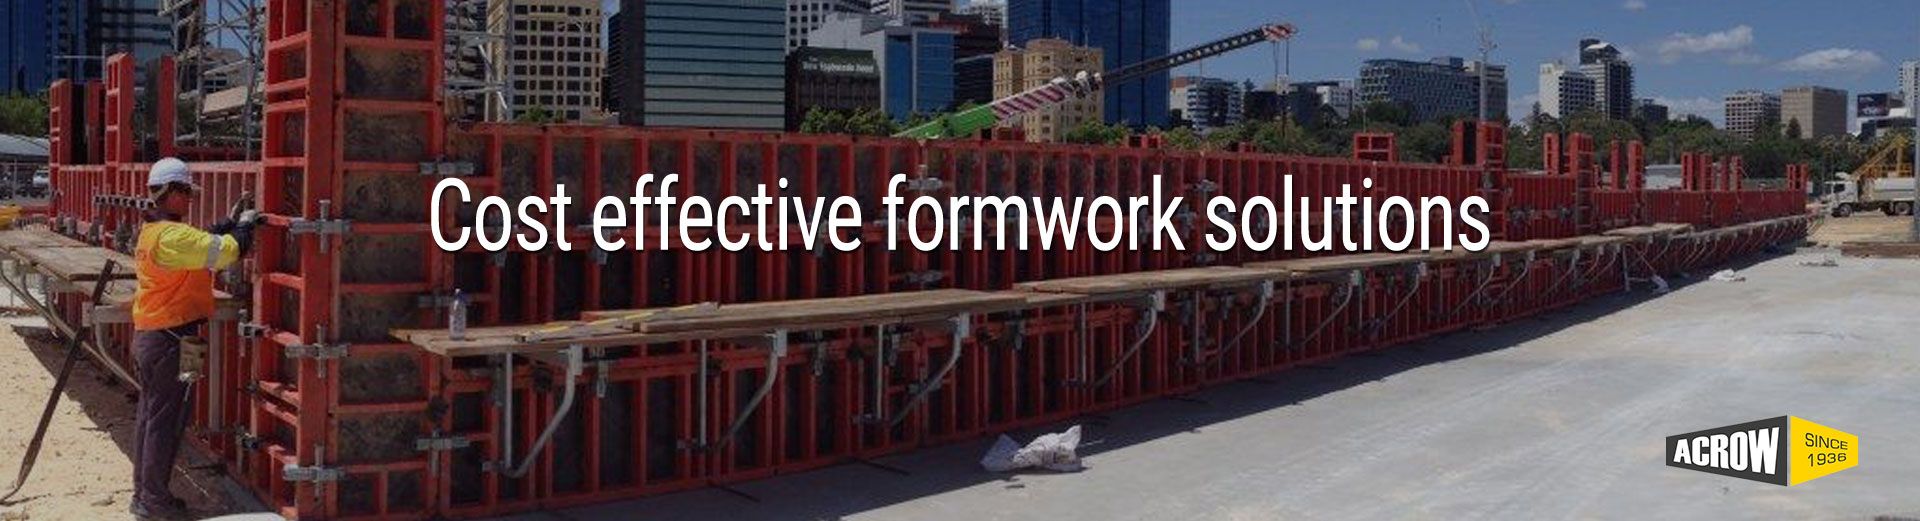 BMD cost effective formwork Acrow